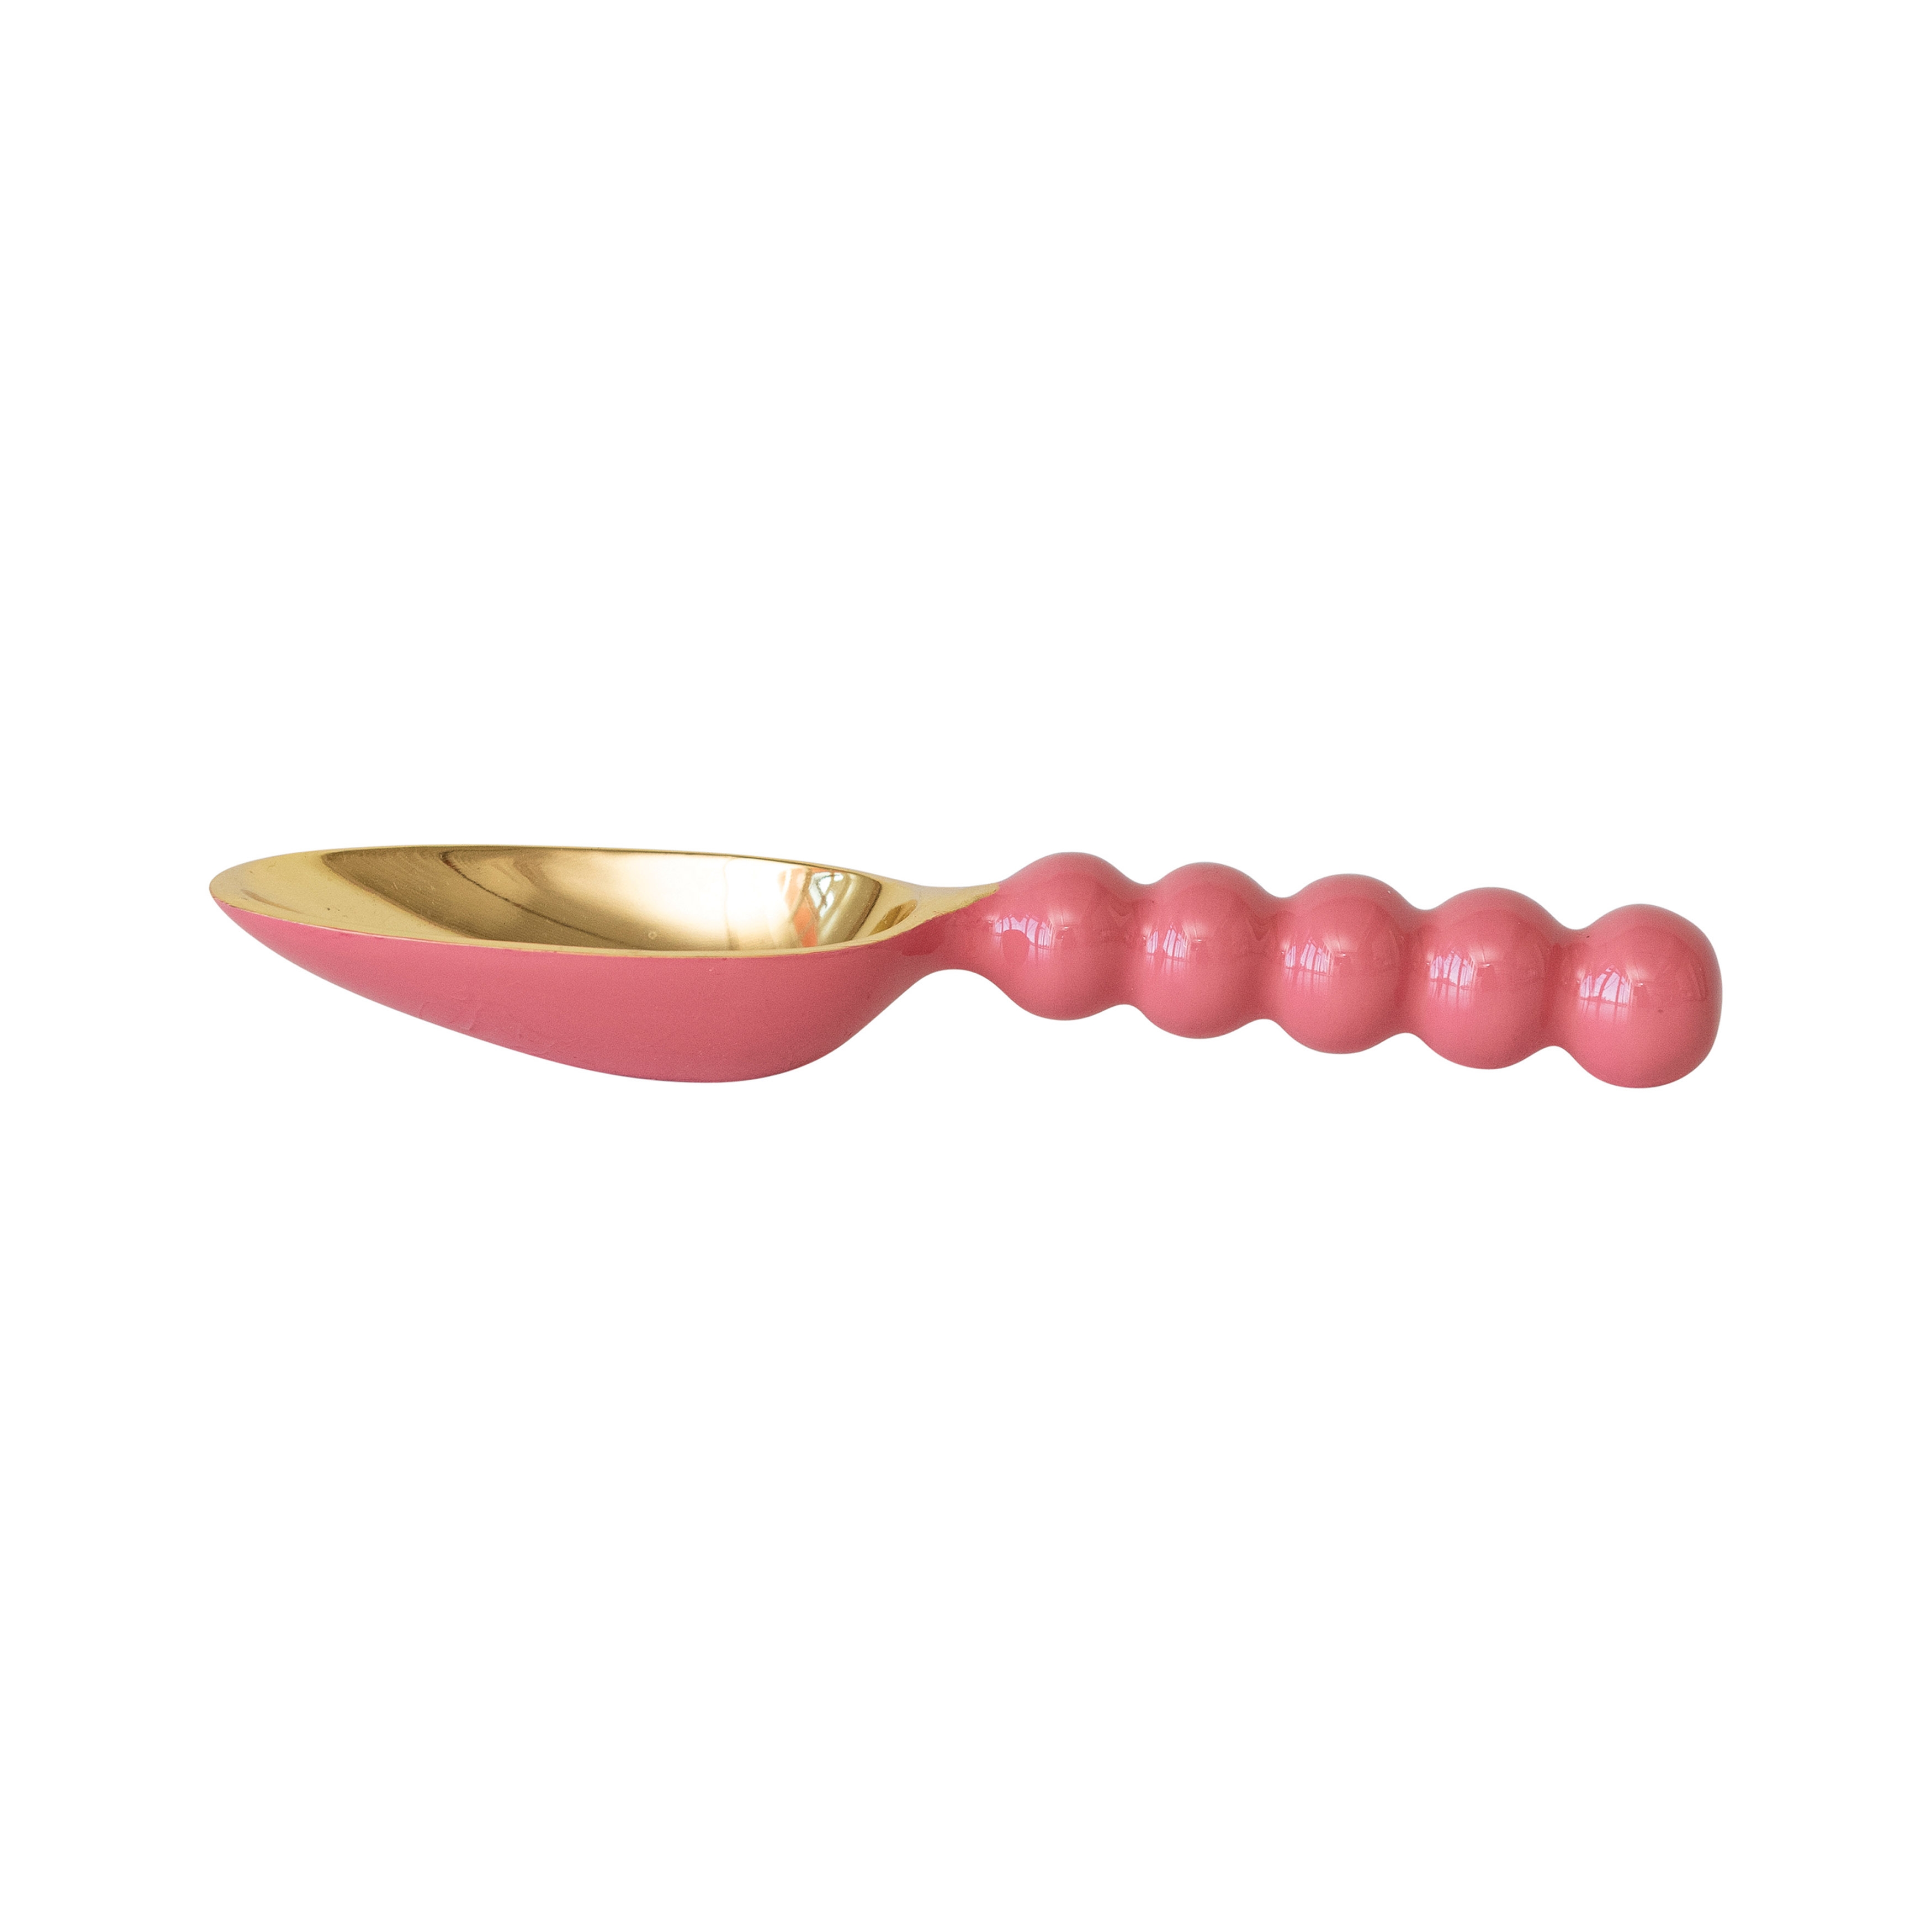 Enameled Aluminum Kitchen Scoop, Pink and Gold - Image 0